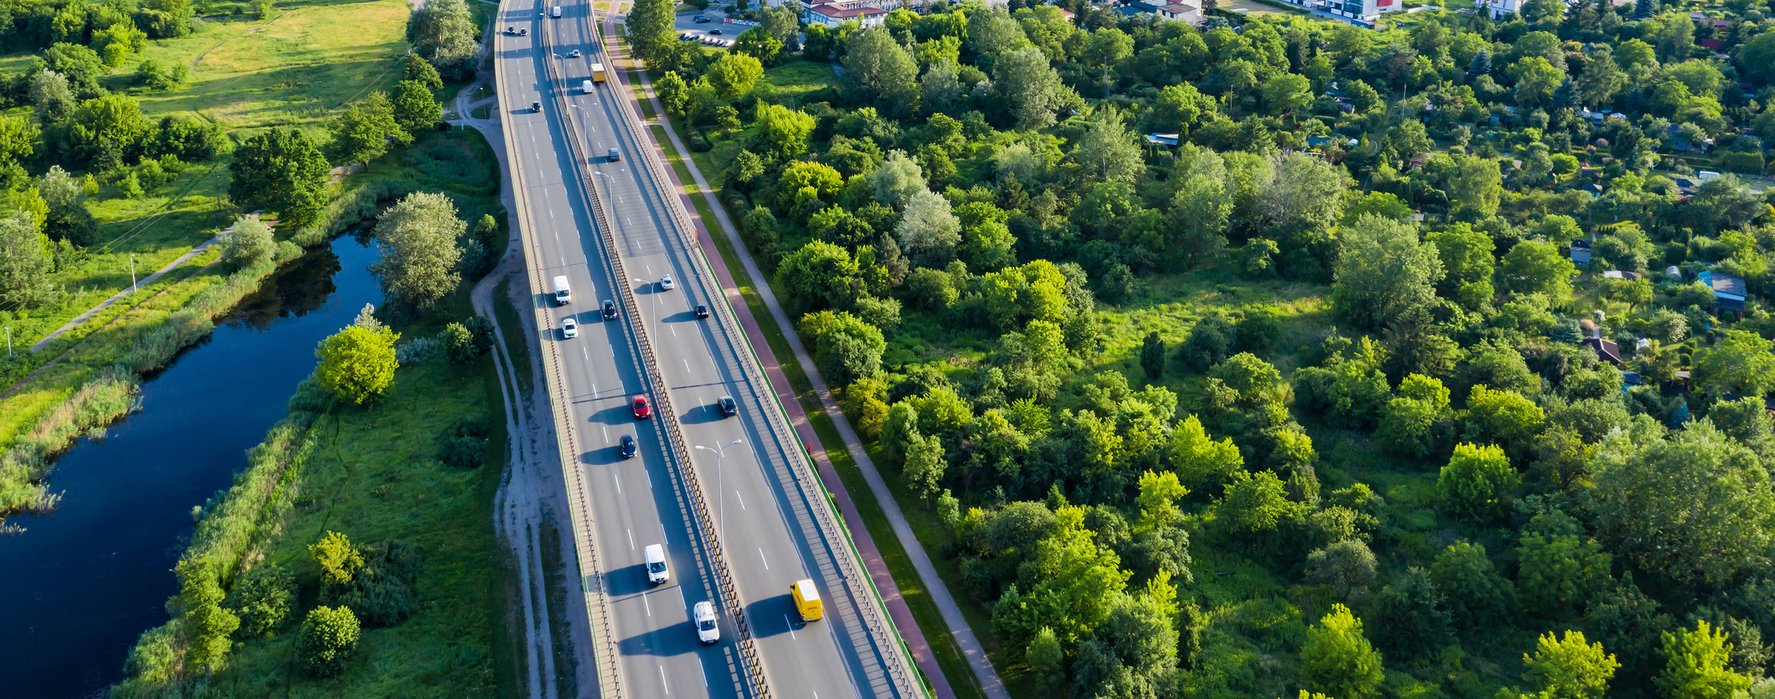 Cars on road with green trees